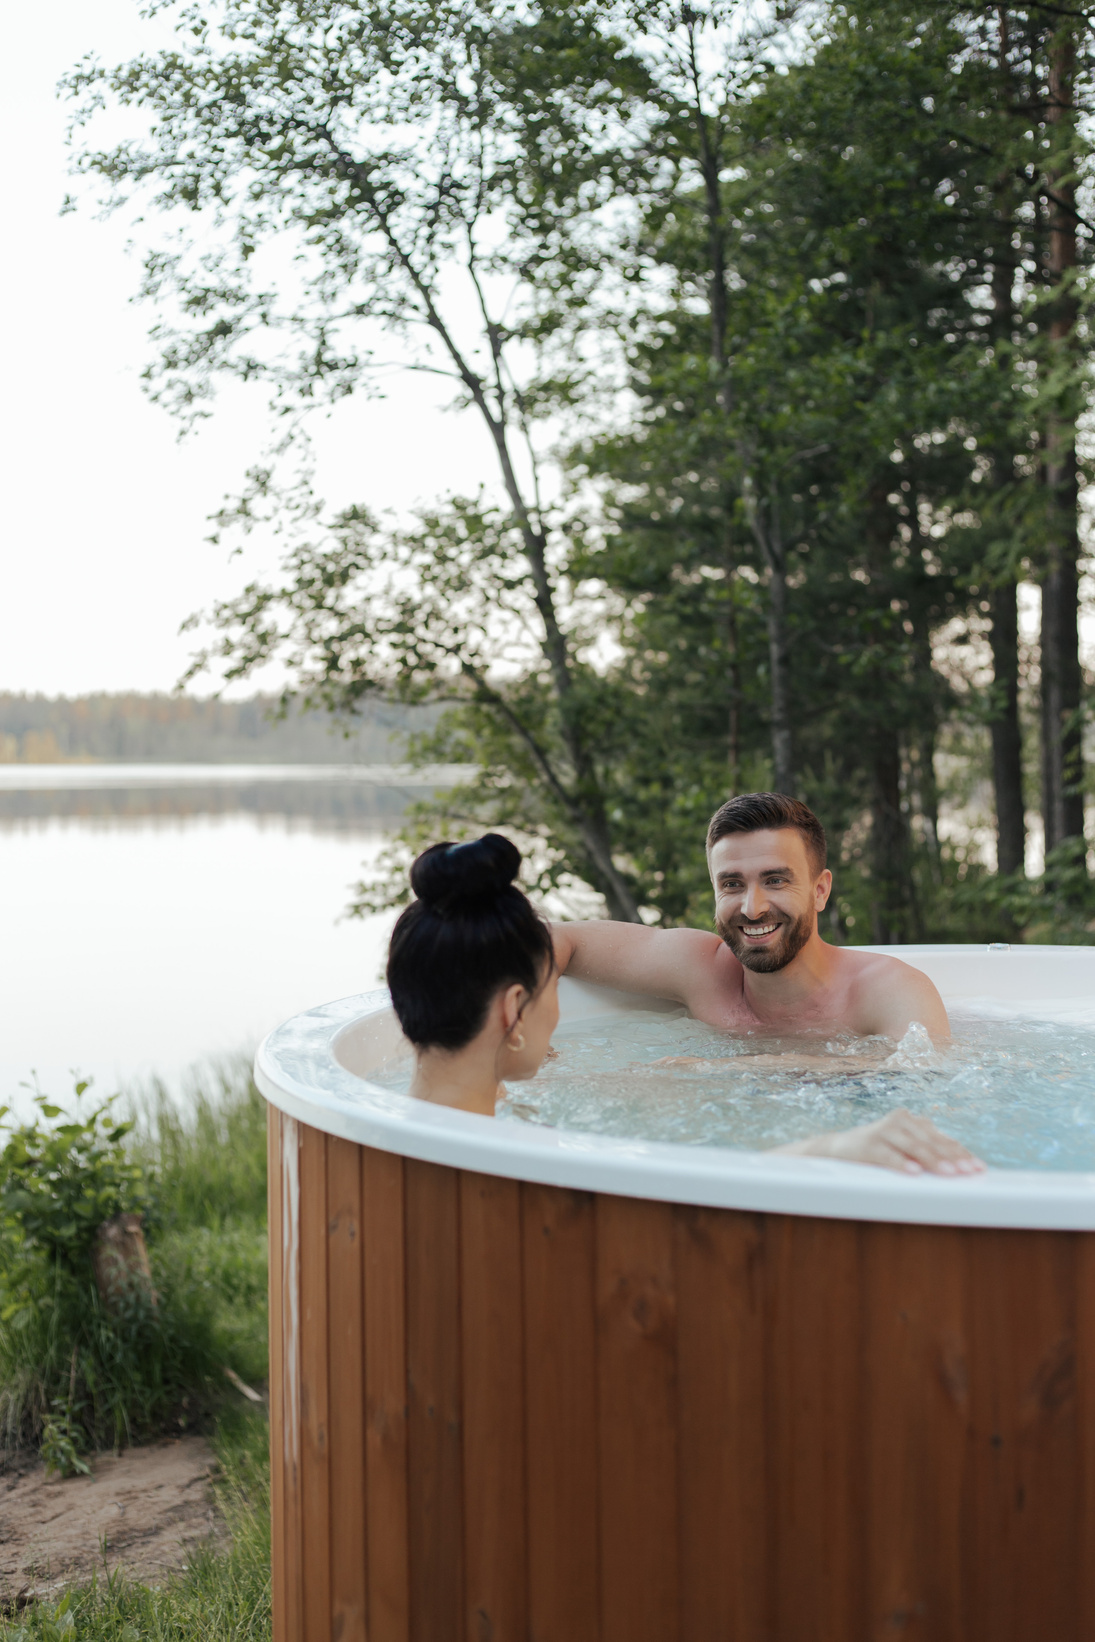 Man and Woman in Hot Tub